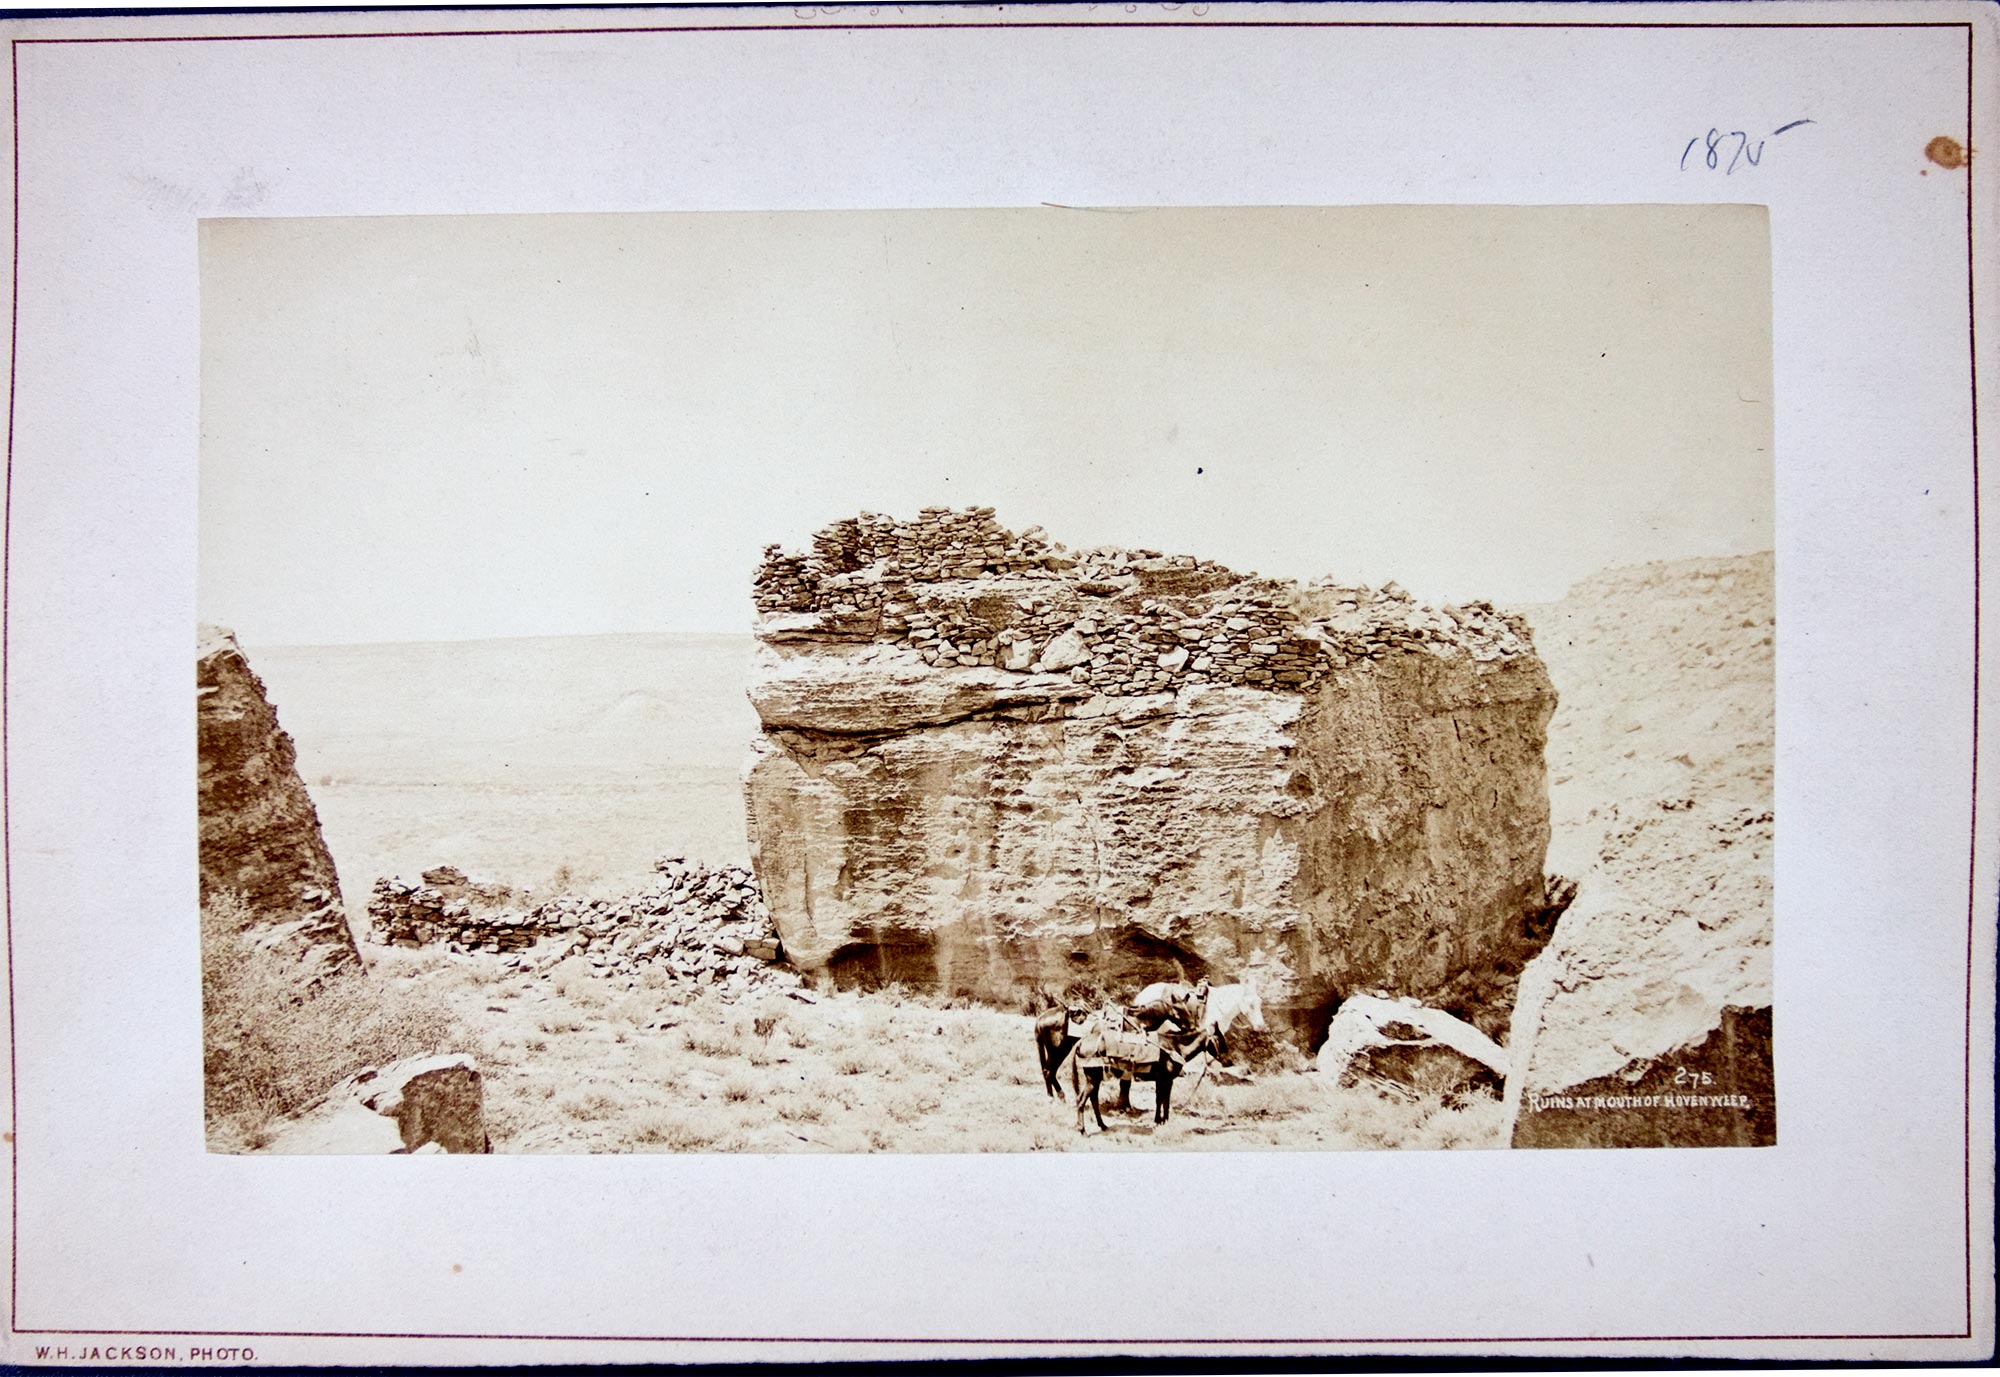 Ruins at the Mouth of Hovenweep, 1875